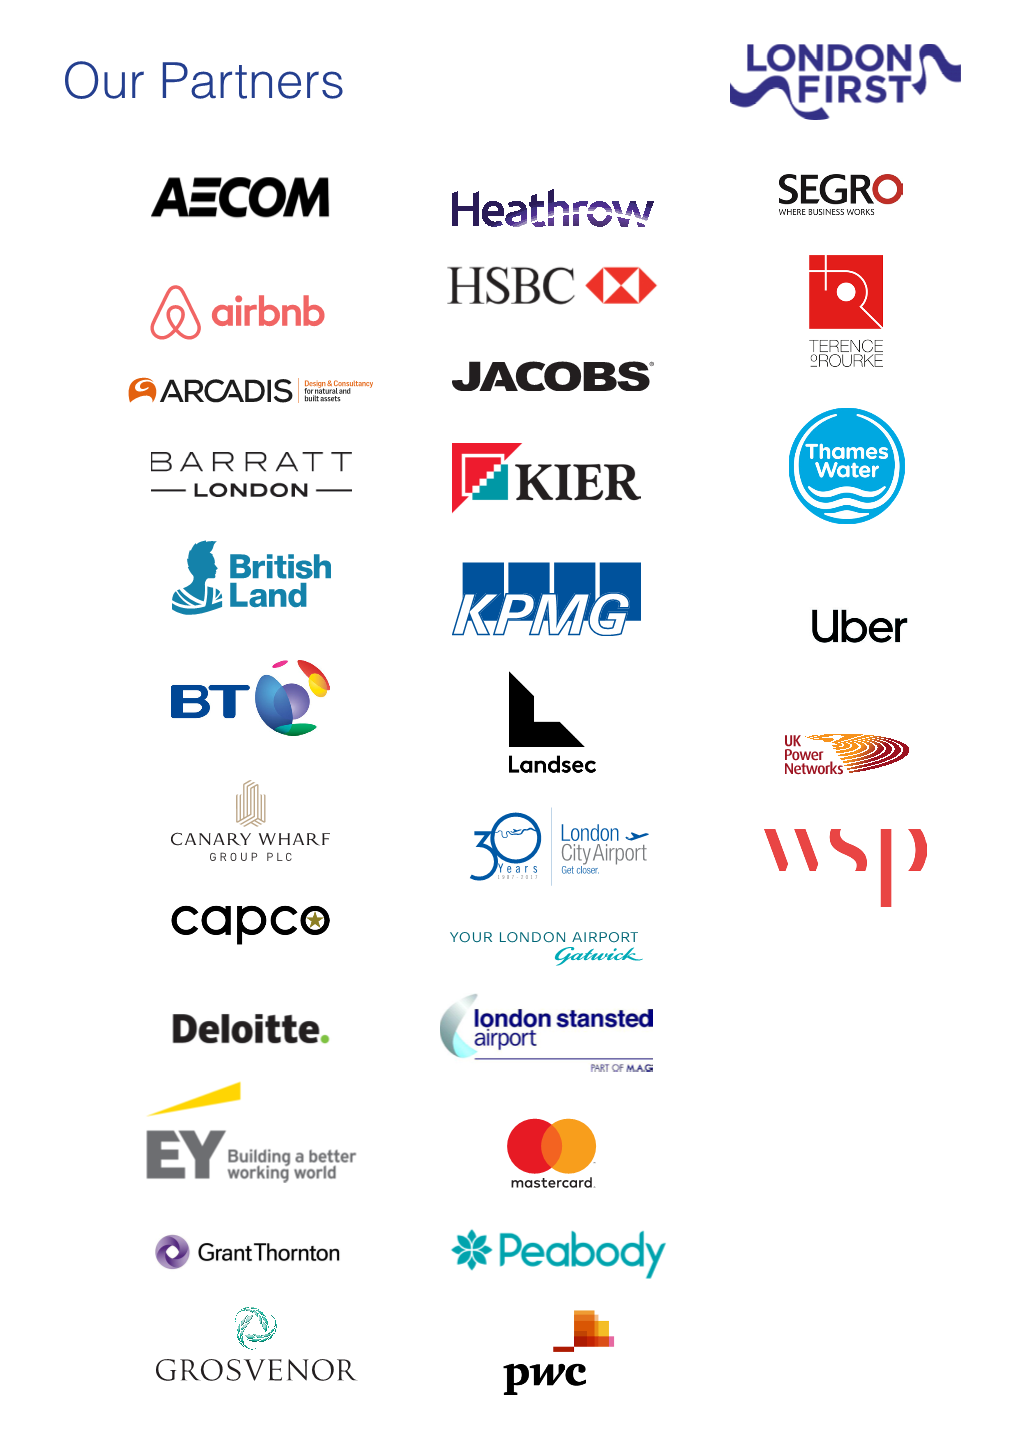 Our Partners Members - by Category